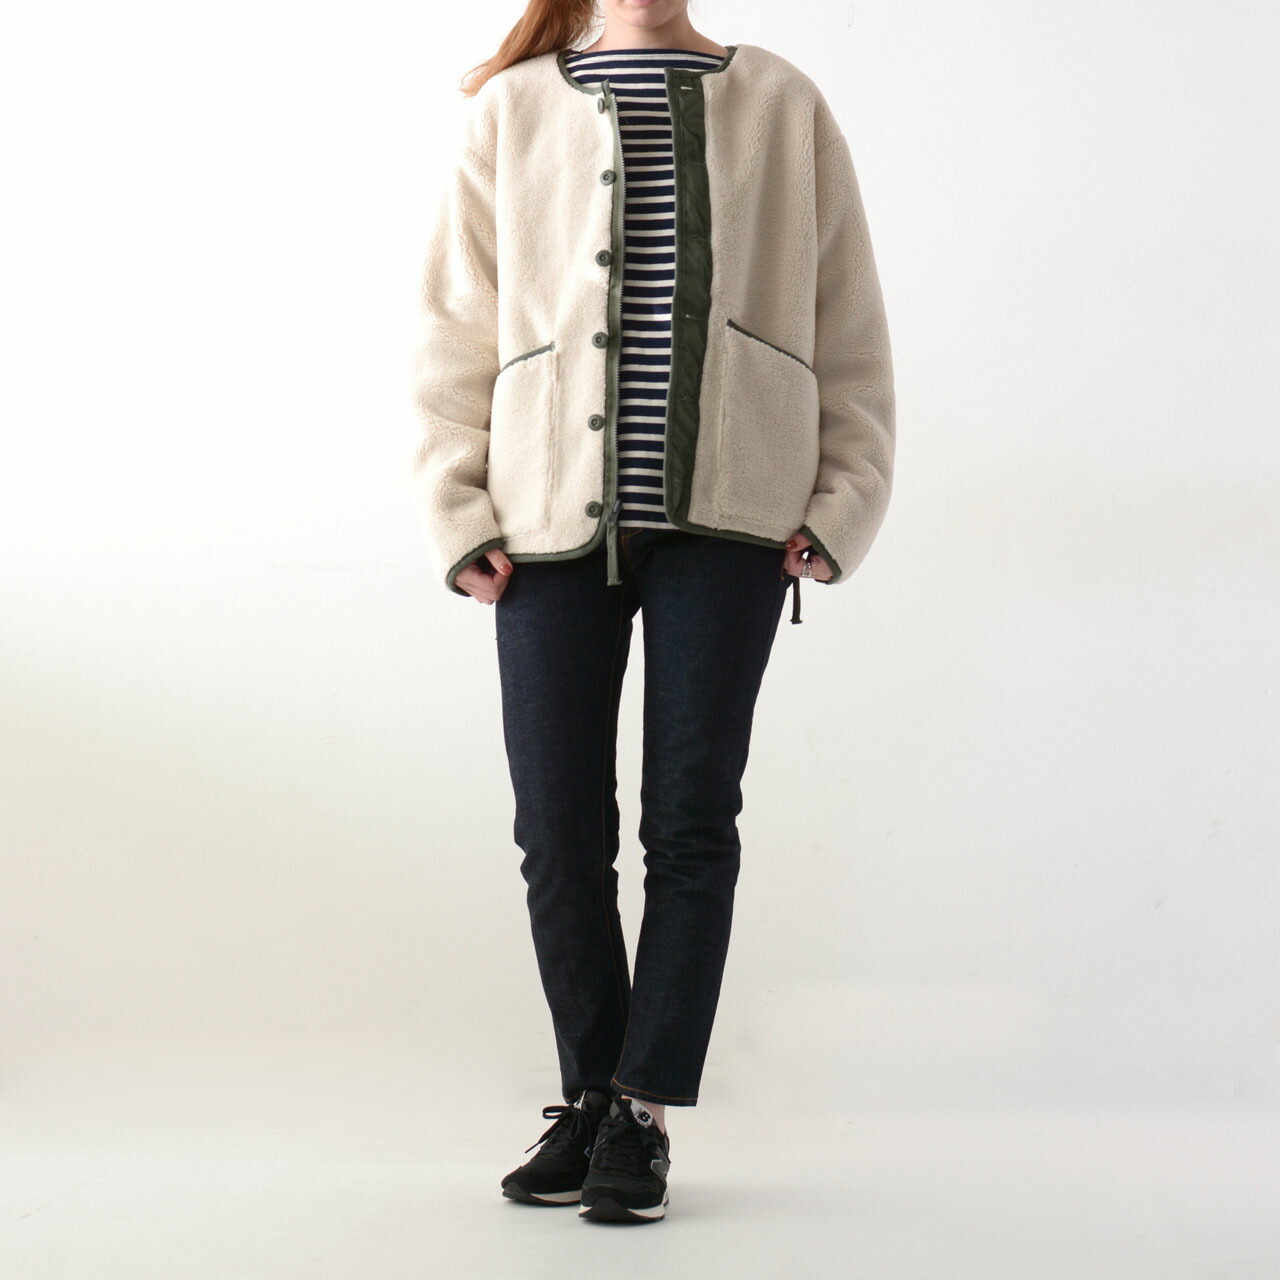 TAION [タイオン] MILITARY RIVERSIBLE CREW NECK DOWN JKT [R104BML-1] _f0051306_15374229.jpg